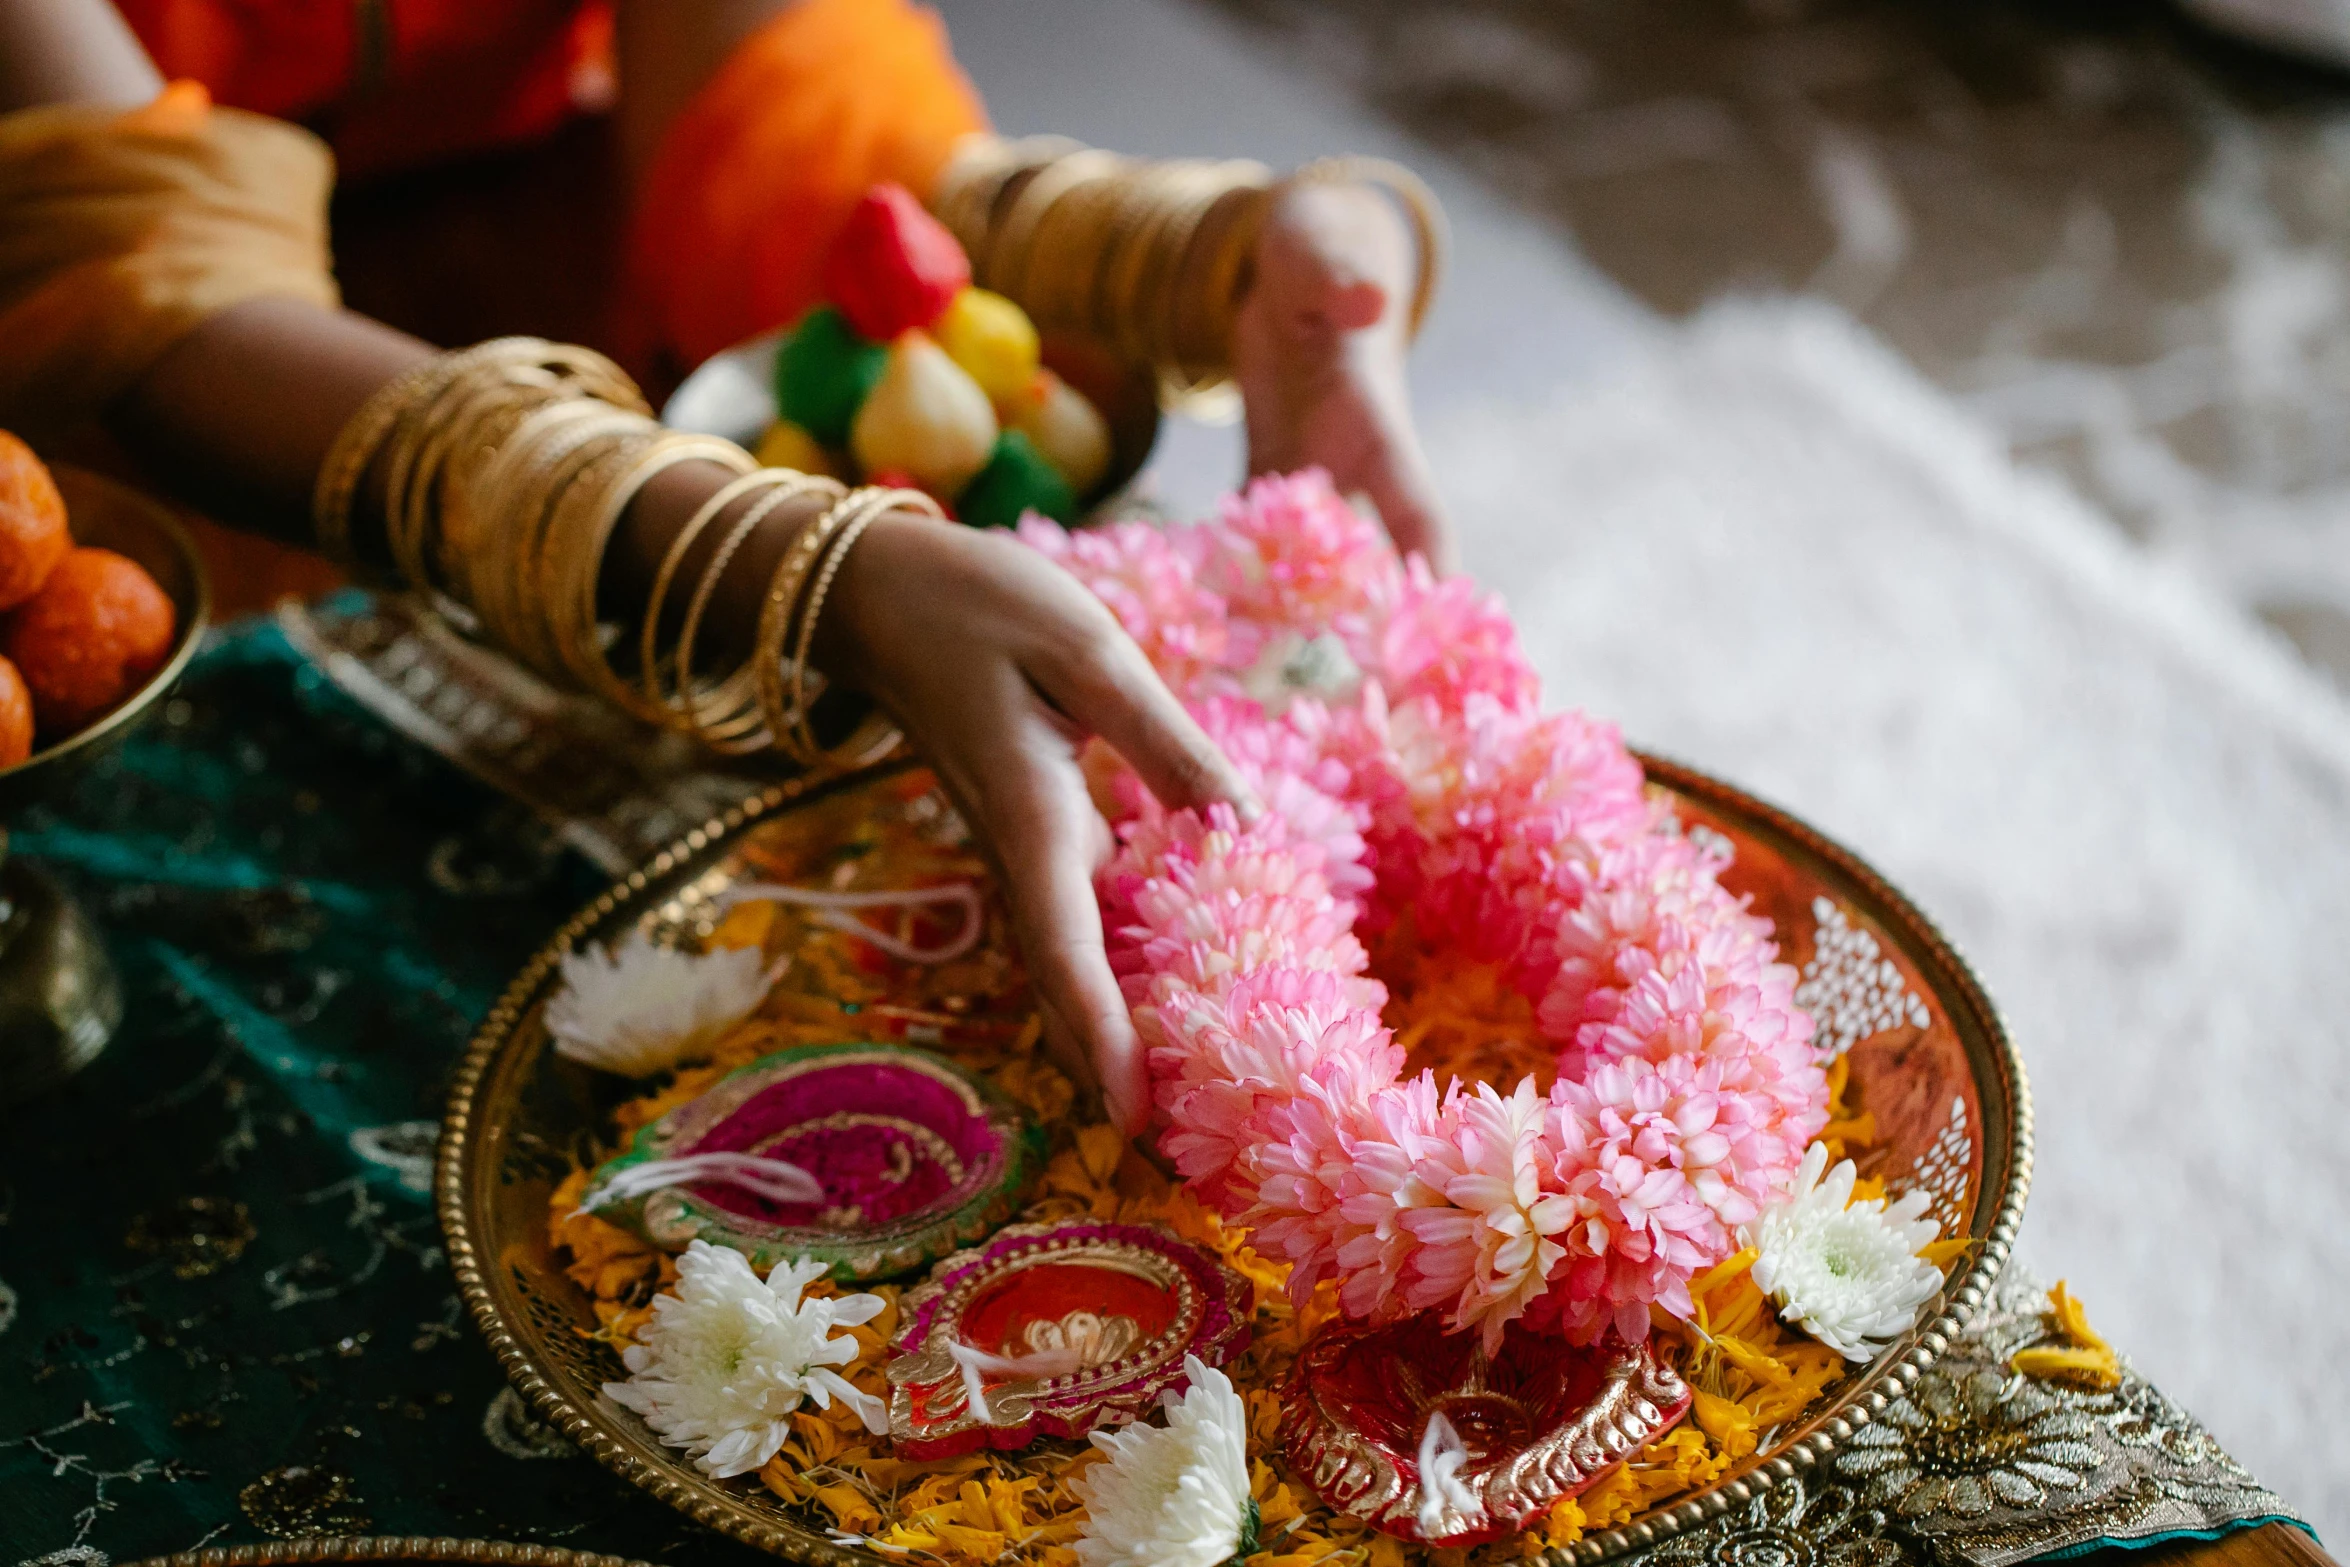 a close up of a person putting flowers on a plate, hurufiyya, hindu ornaments, pink and orange, posing, floating bouquets